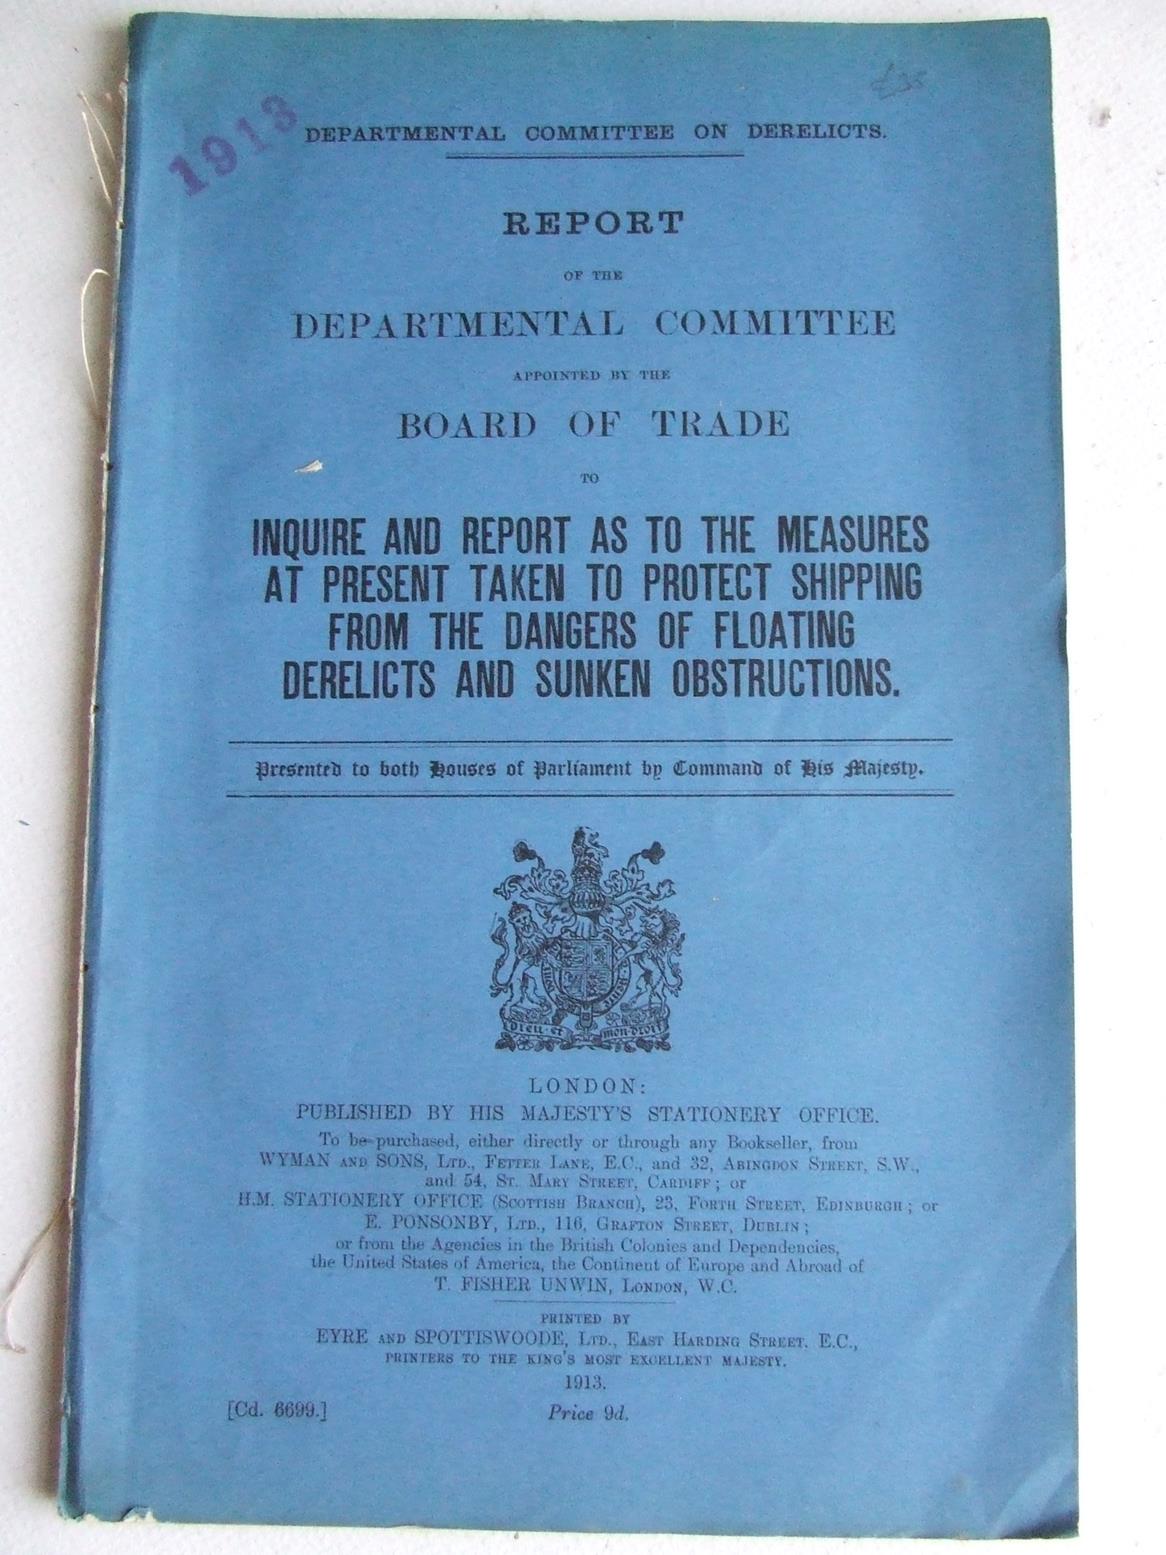 REPORT OF THE DEPARTMENTAL COMMITTEE APPOINTED BY THE BOARD OF TRADE